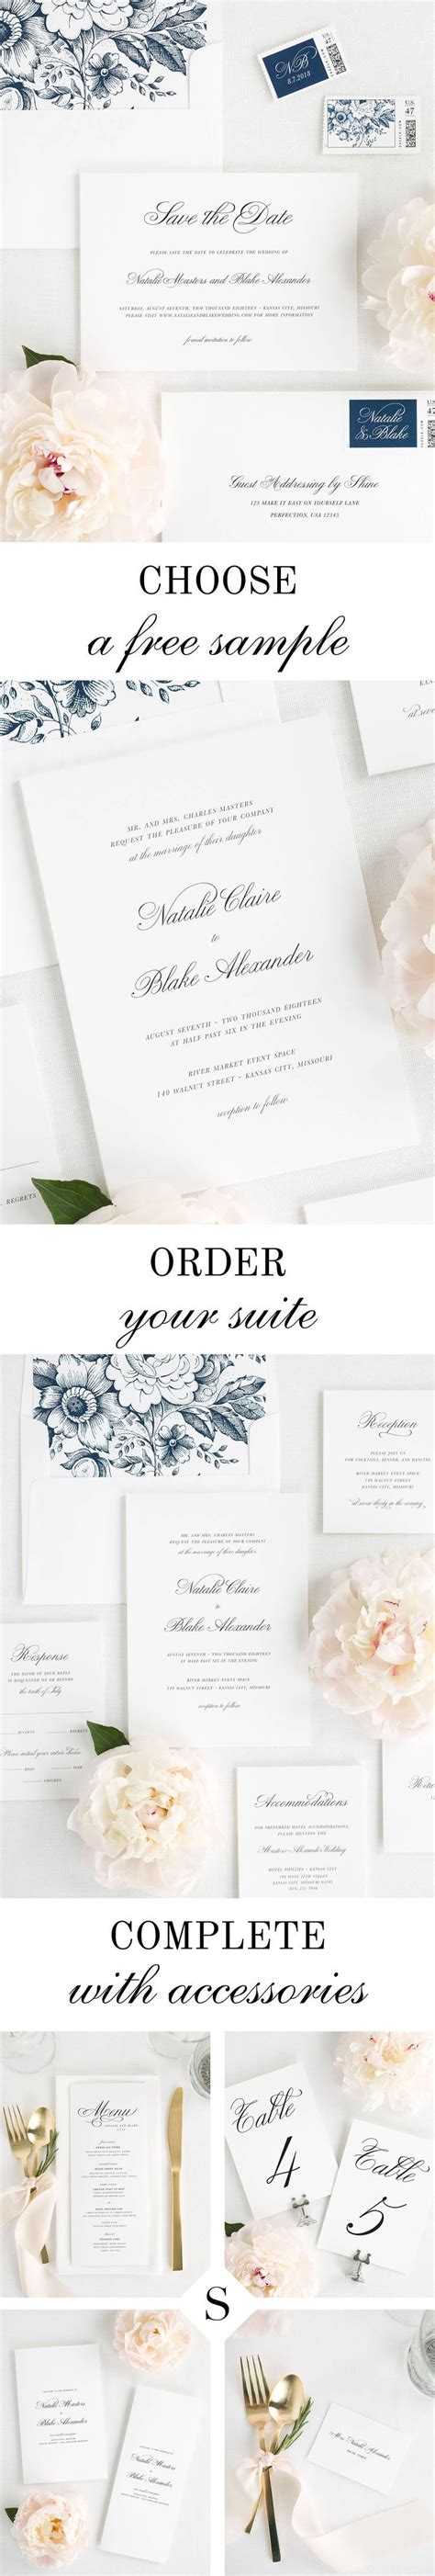 It also deeps into how to design your wedding invitations with your whether making your own wedding invitations in a diy, or designing email wedding invitations, you will find following tips useful and convenient. What's Your Wedding Invite Style? | Wedding invitations, Wedding invitation styles, Calligraphy ...